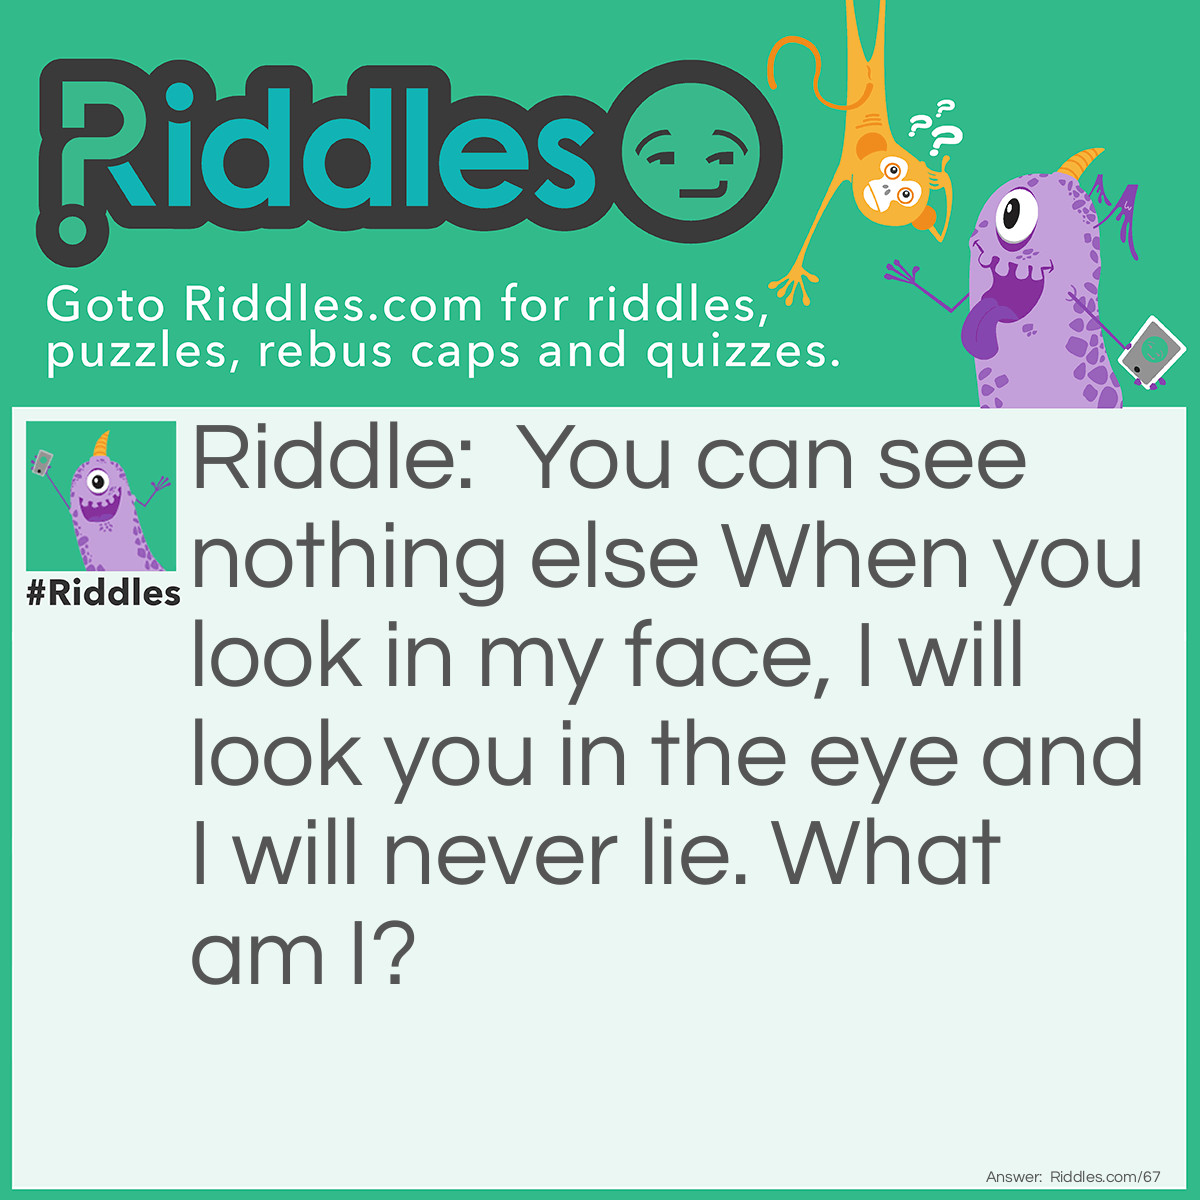 Riddle: You can see nothing else When you look in my face, I will look you in the eye and I will never lie. What am I? Answer: I am your reflection.